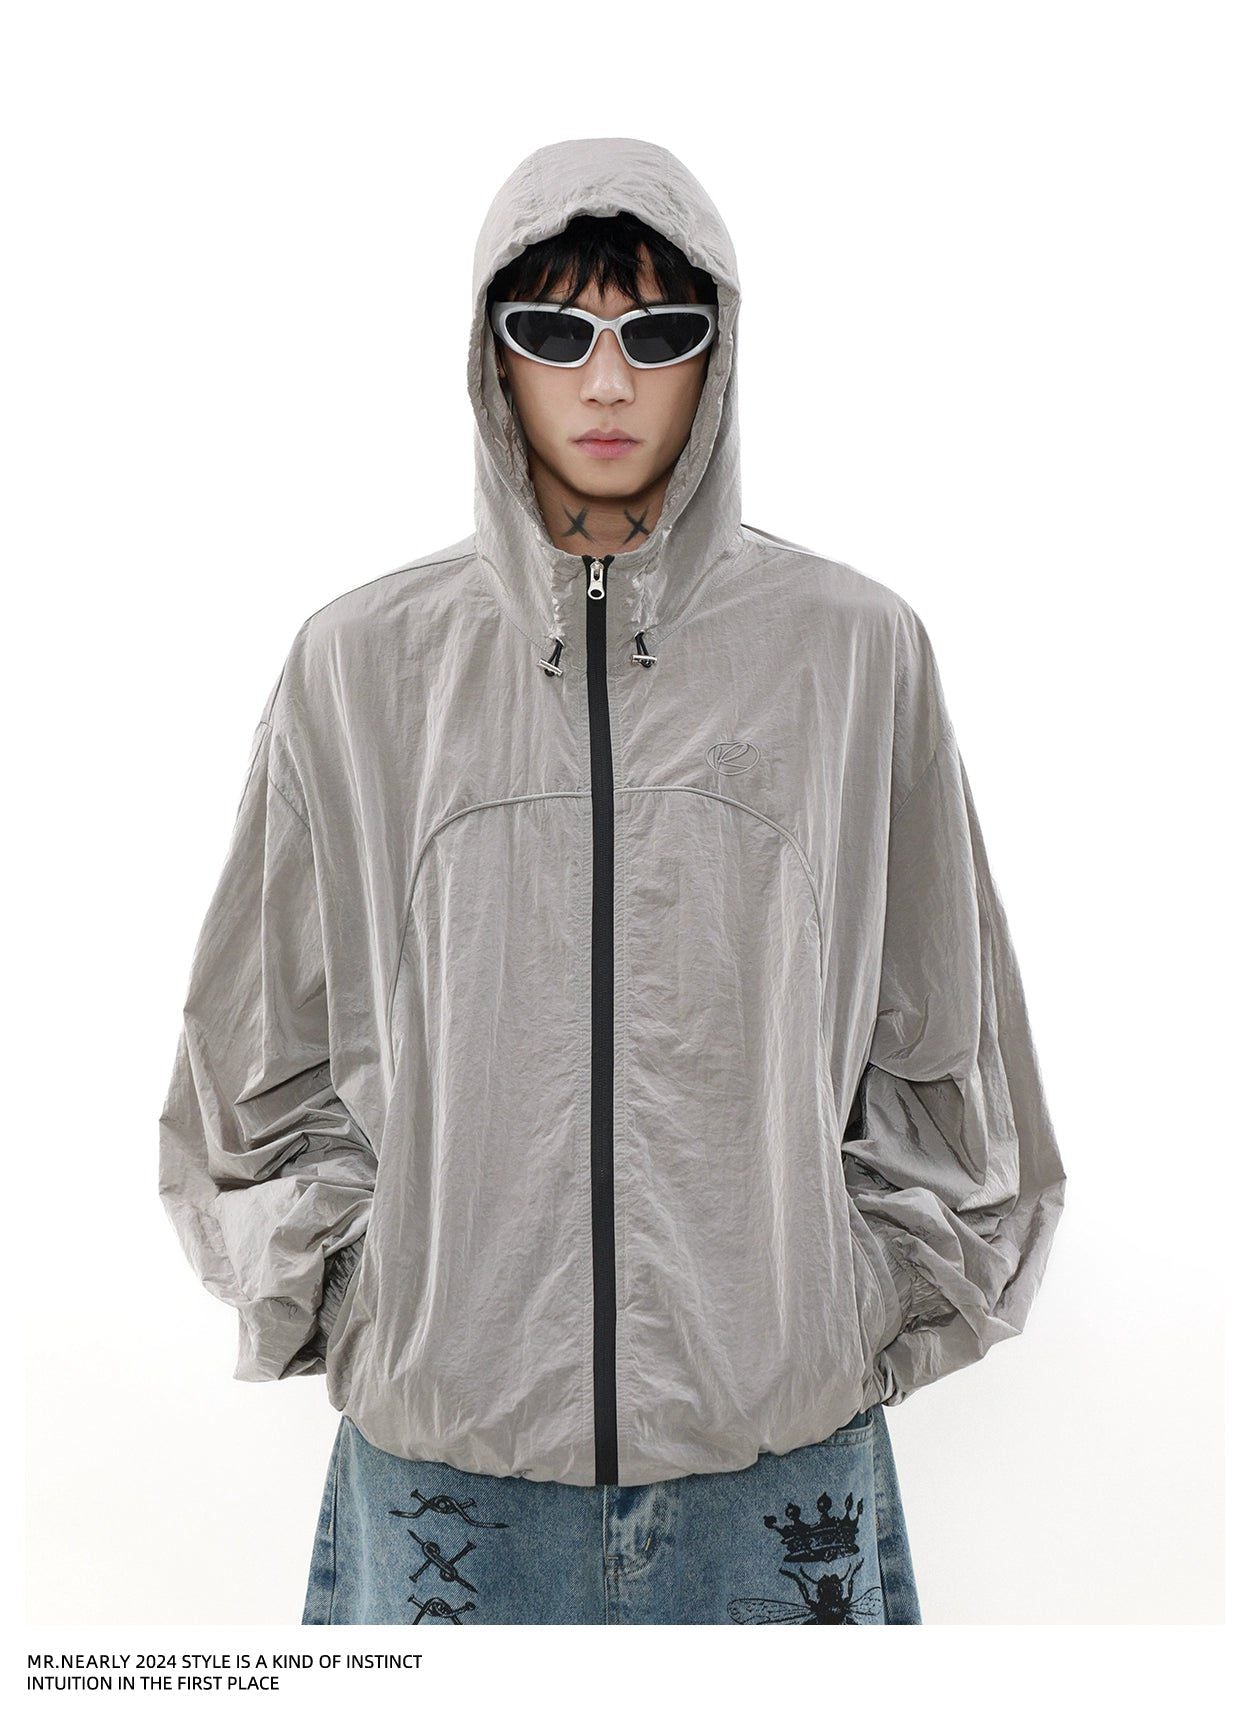 Regular Fit Hooded Sun Protection Jacket Korean Street Fashion Jacket By Mr Nearly Shop Online at OH Vault